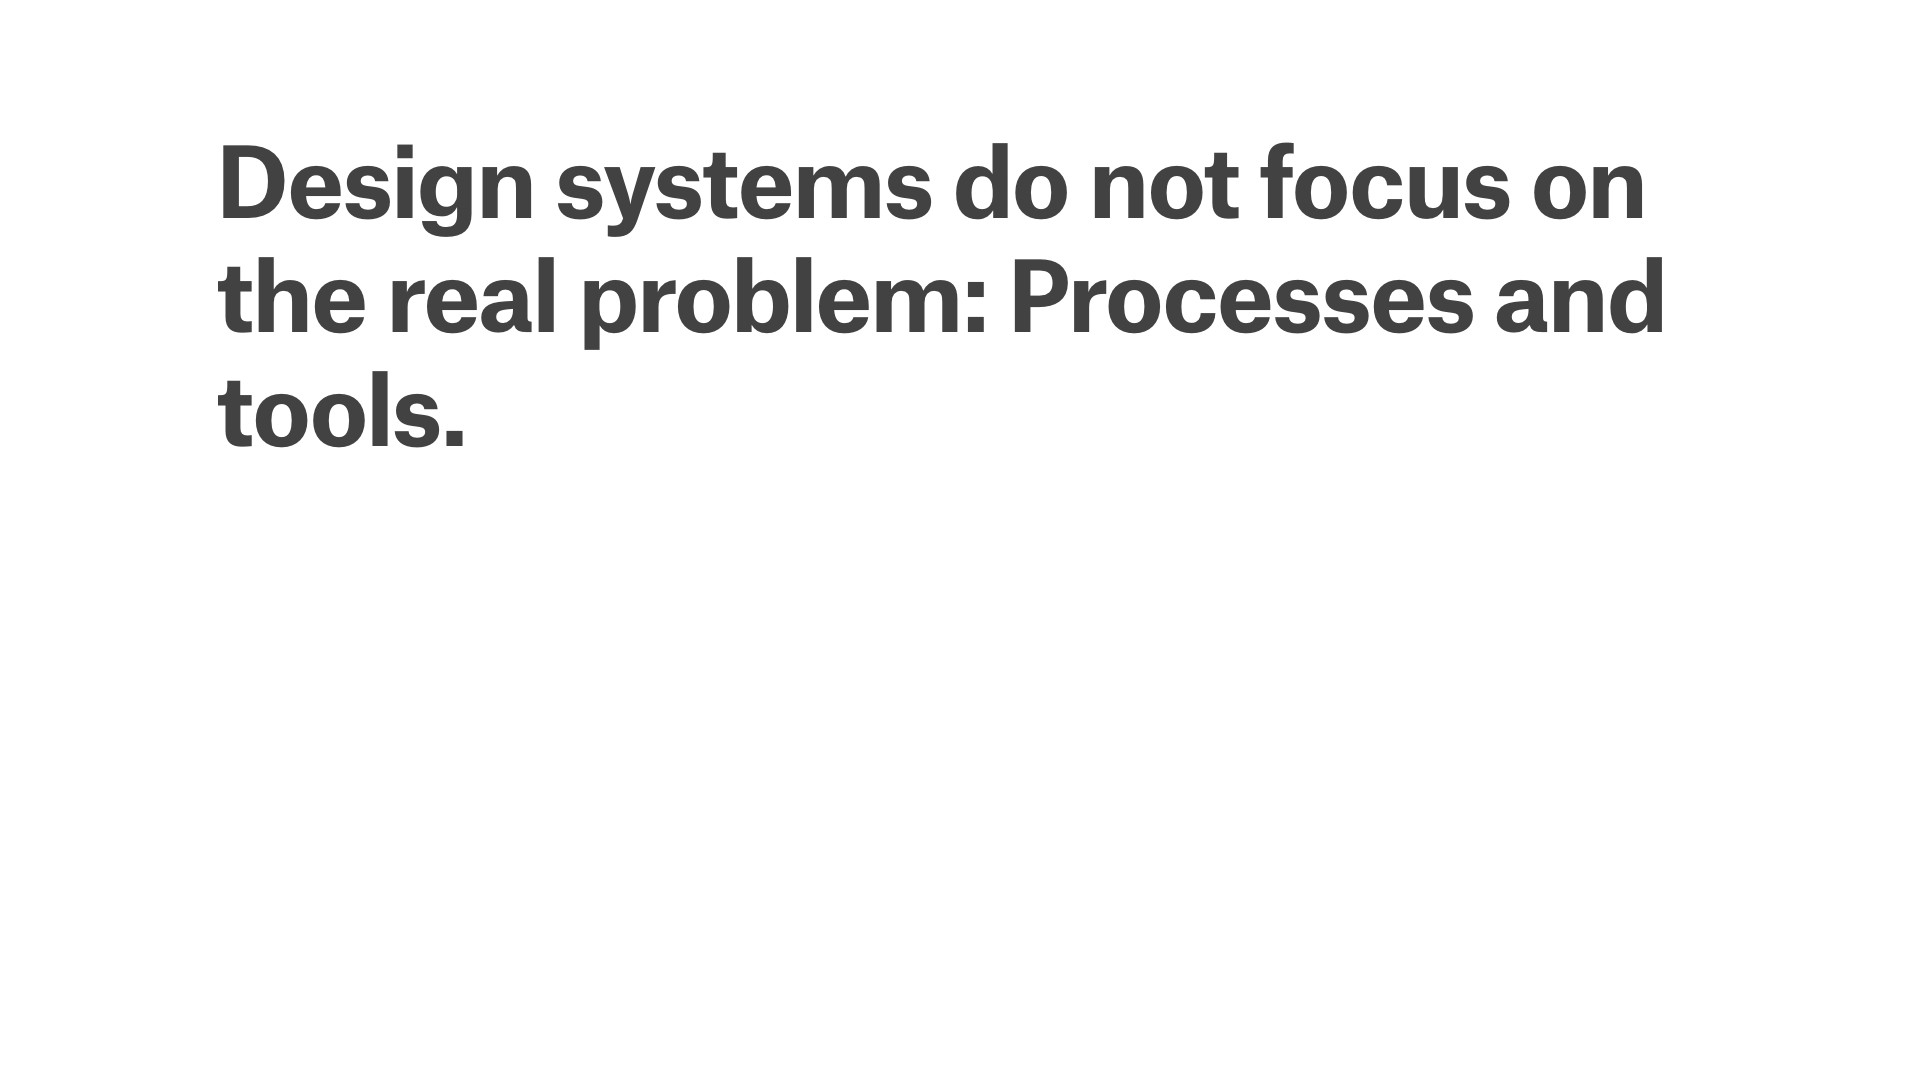 Design systems do not focus on the real problem: processes and tools.